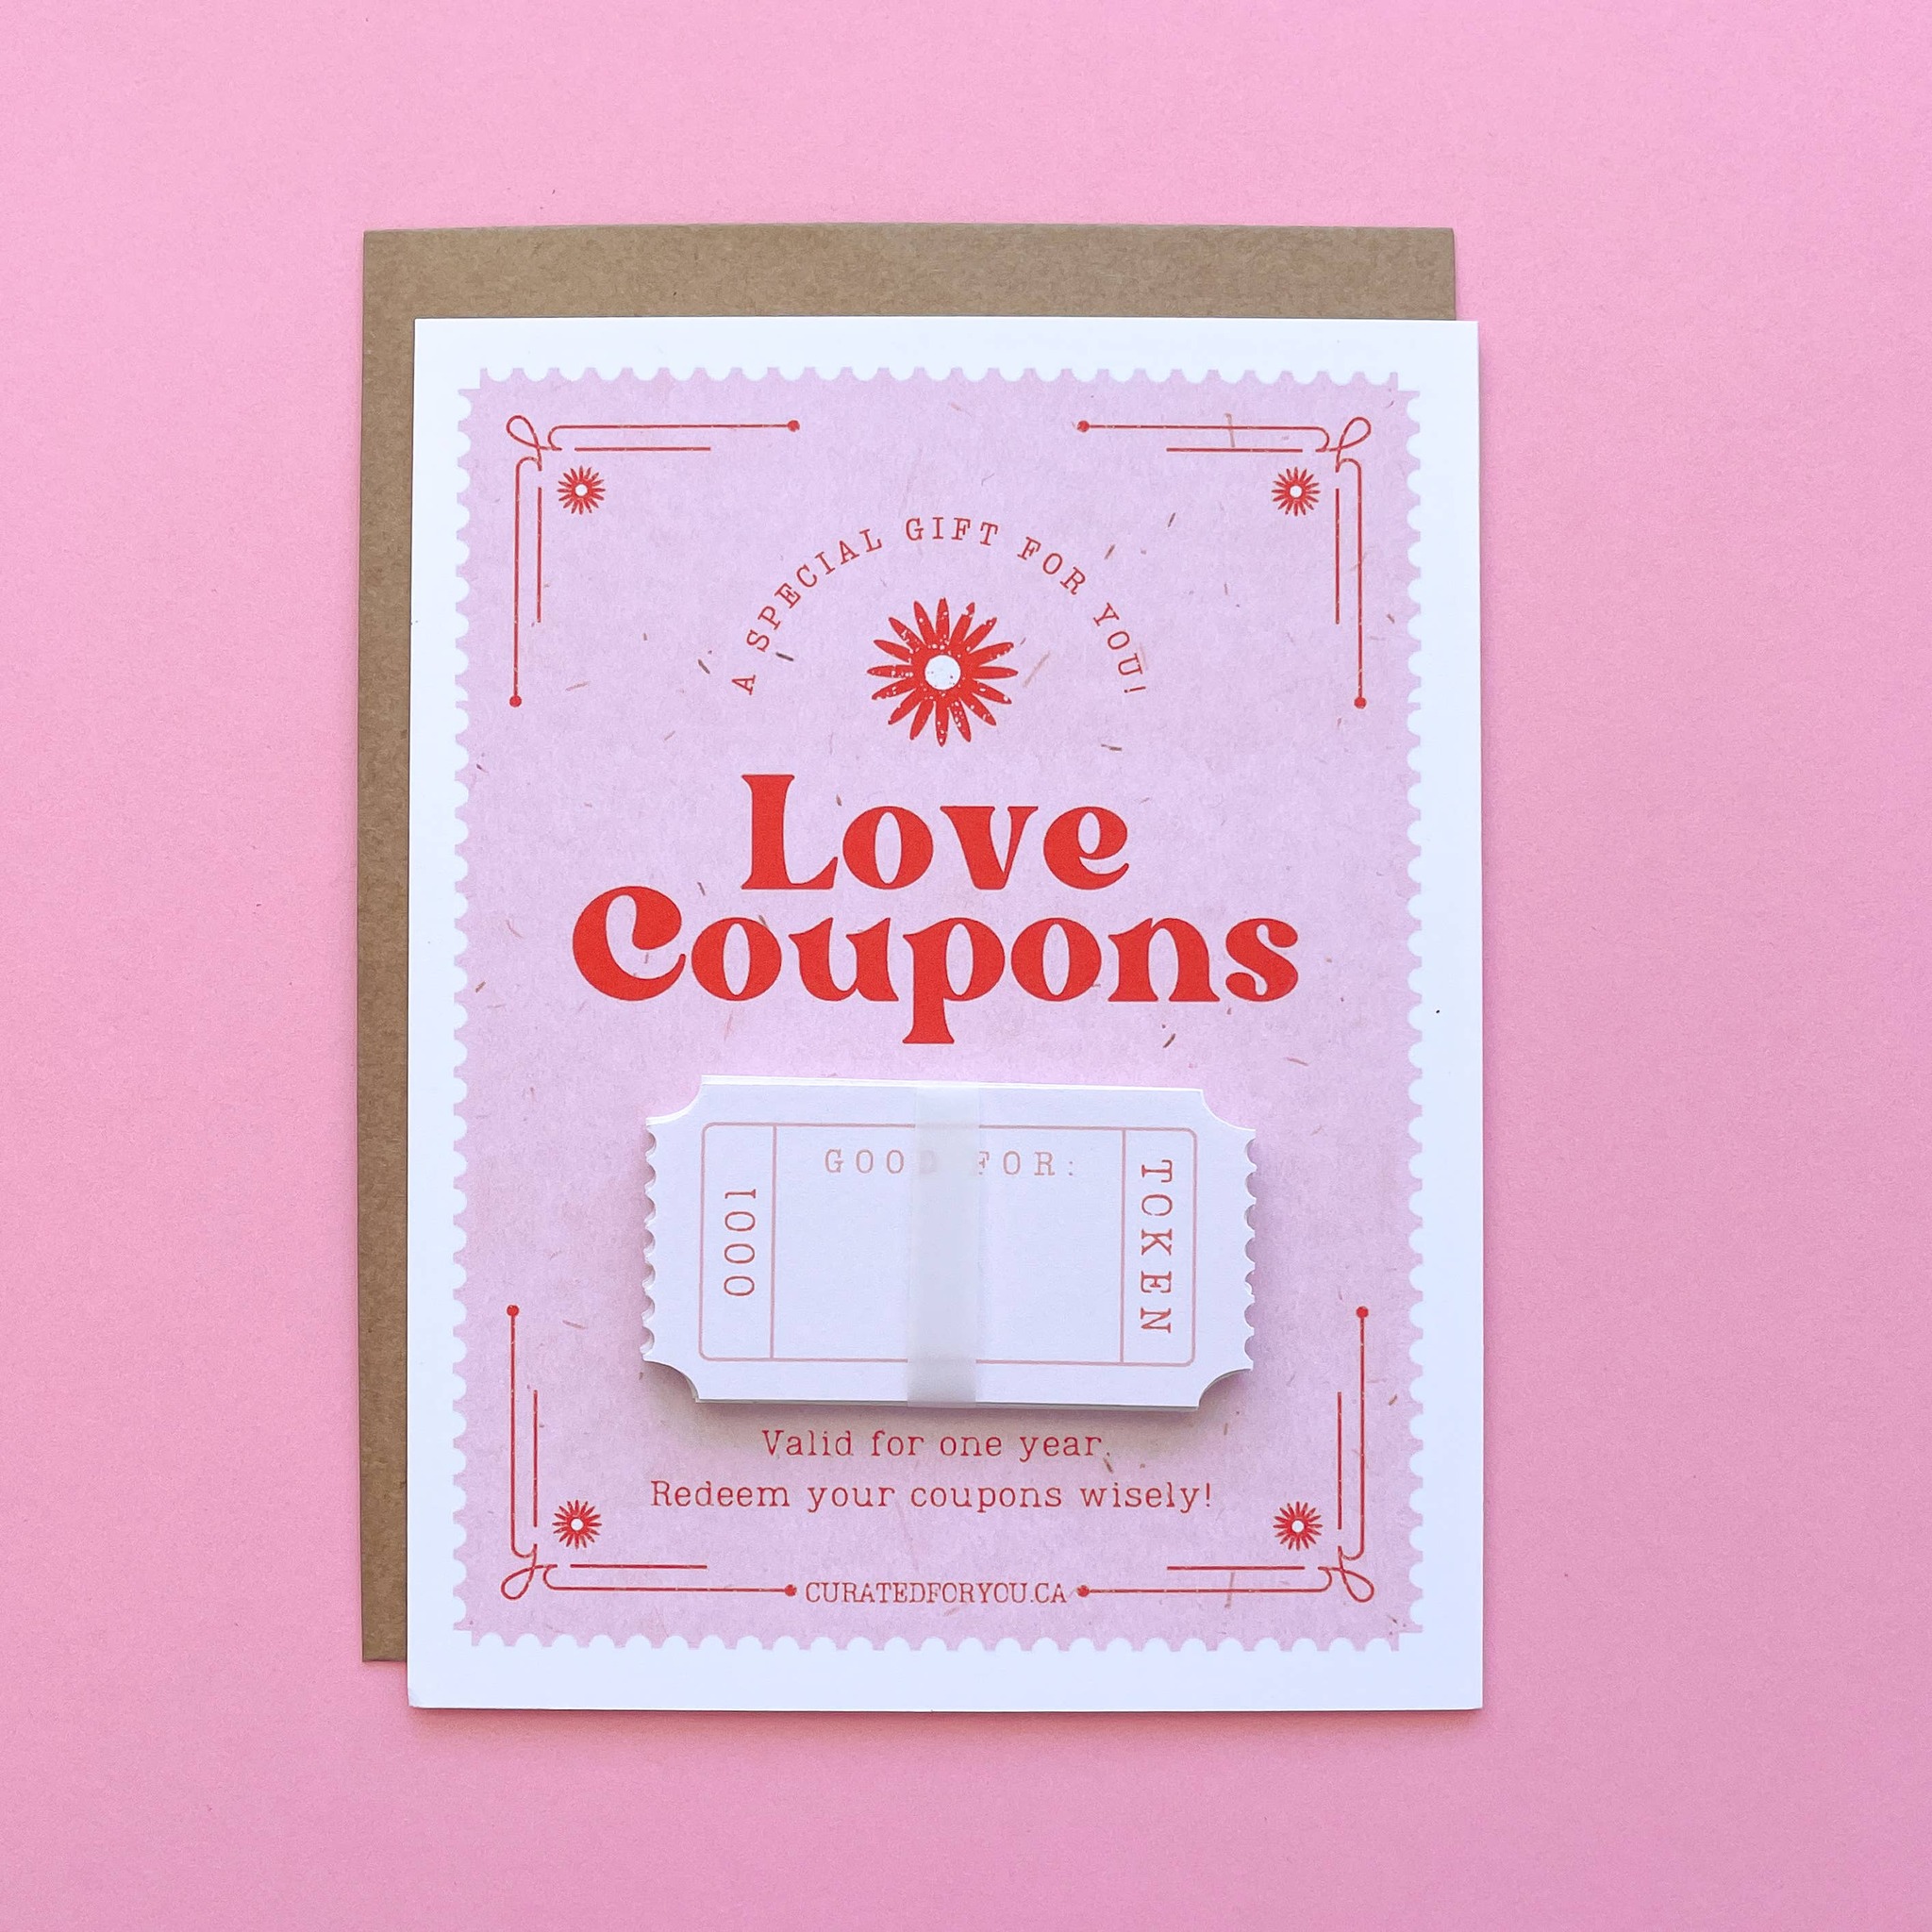 Curated for you Gift - Retro Love Coupons Card - pink